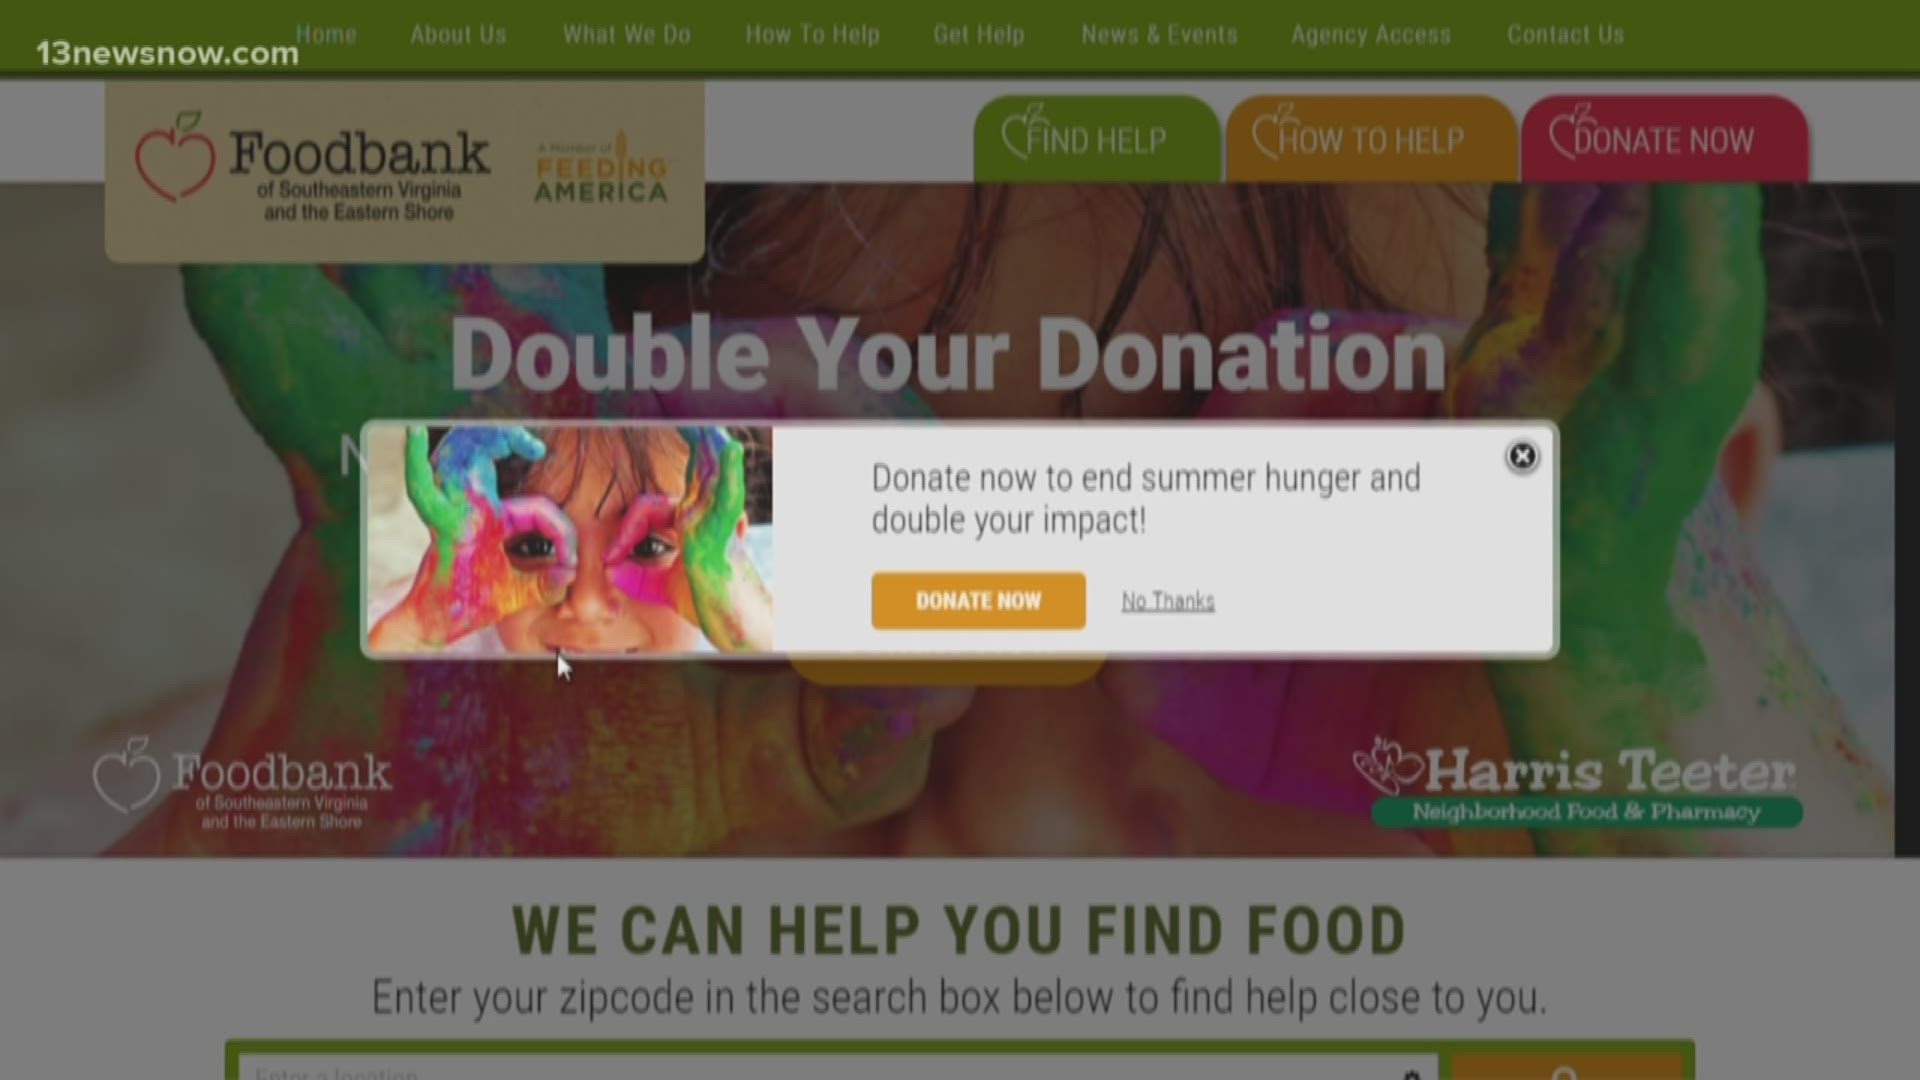 The Foodbank of Southeastern Virginia and the Eastern Shore needs your help with it's 'End Summer Hunger' campaign.